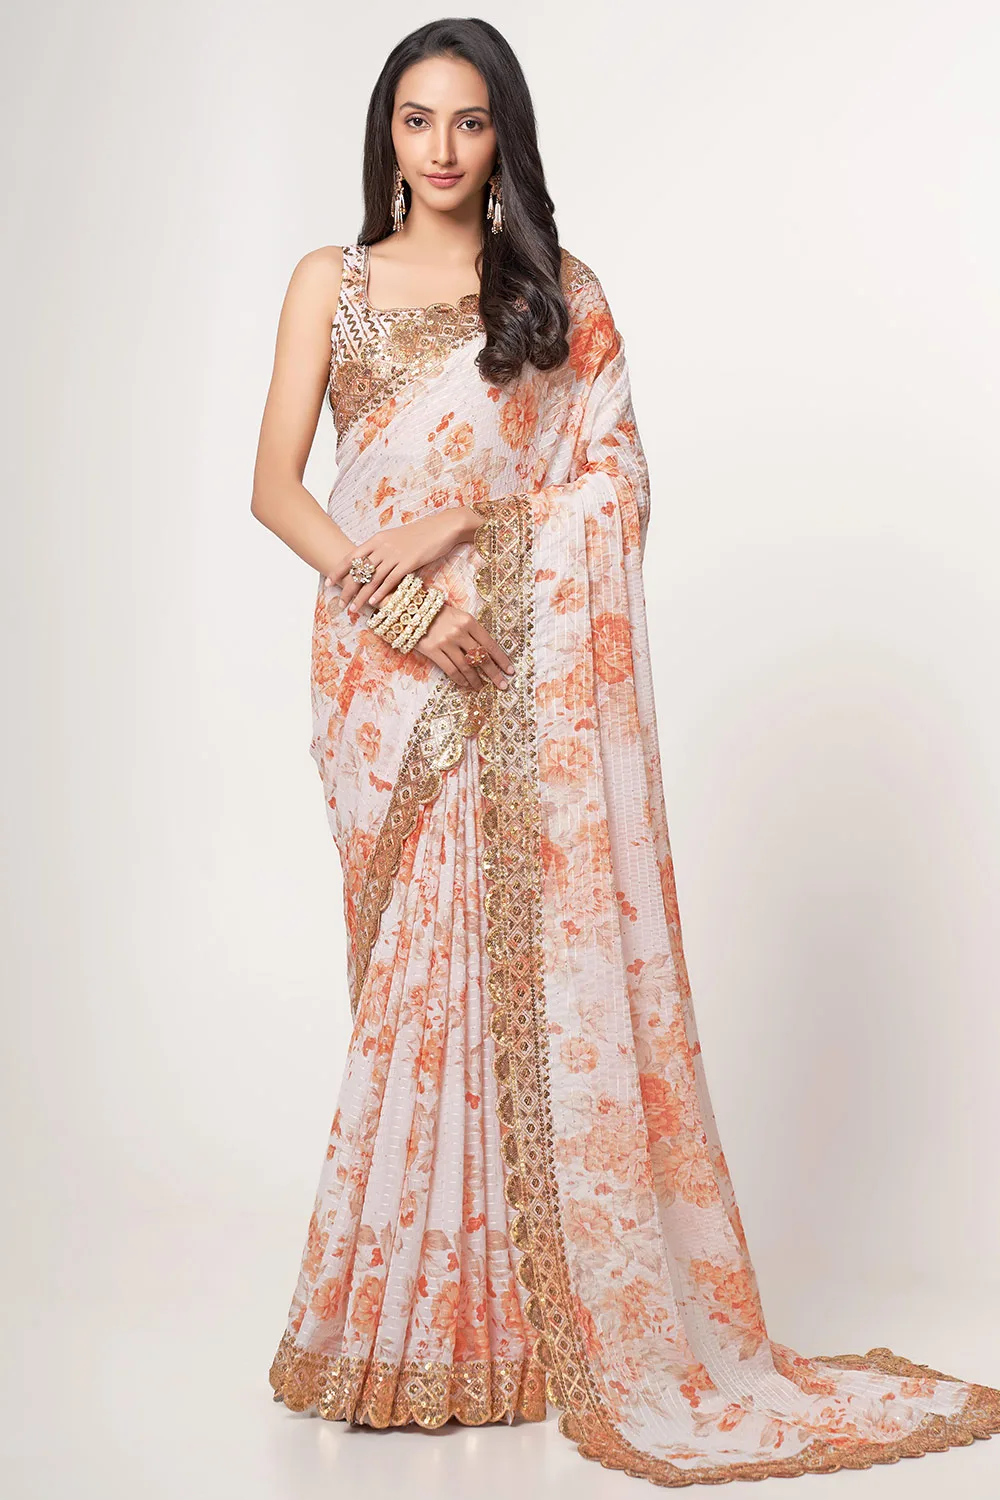 Elegant White Organza Floral Saree with Sequins Embroidery and Digital Print